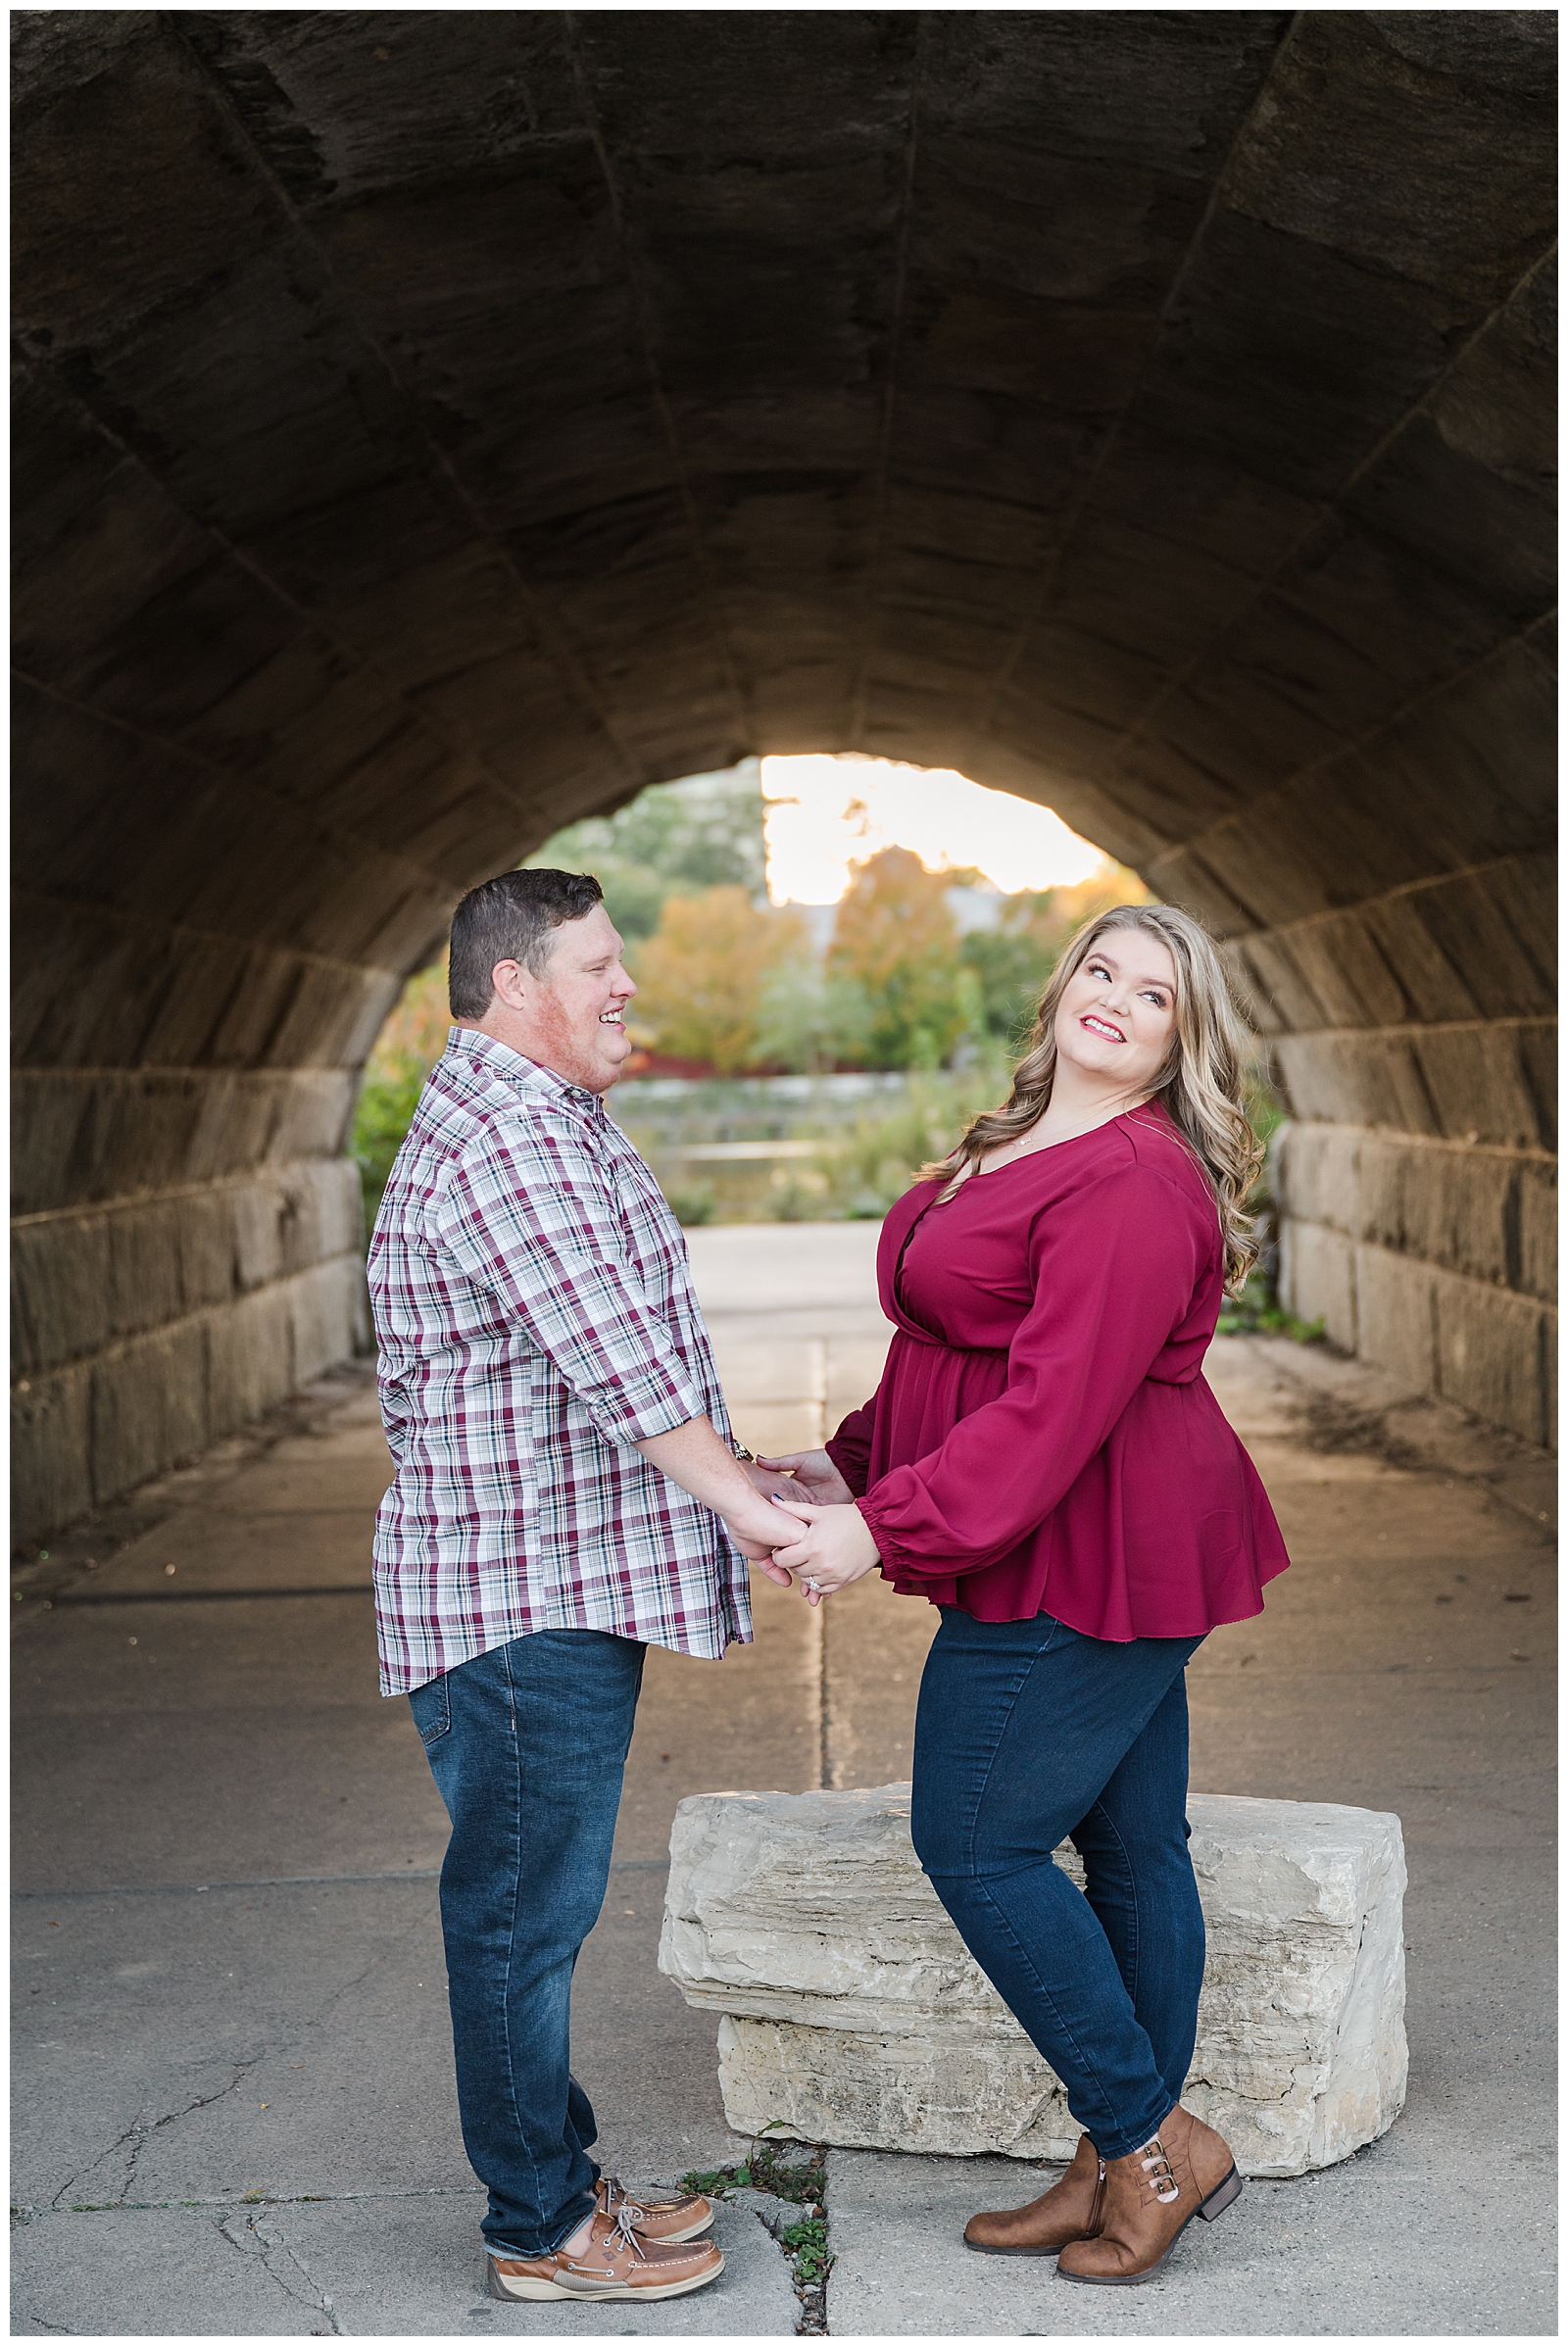 Sunset Engagement session at Lincoln park, Chicago